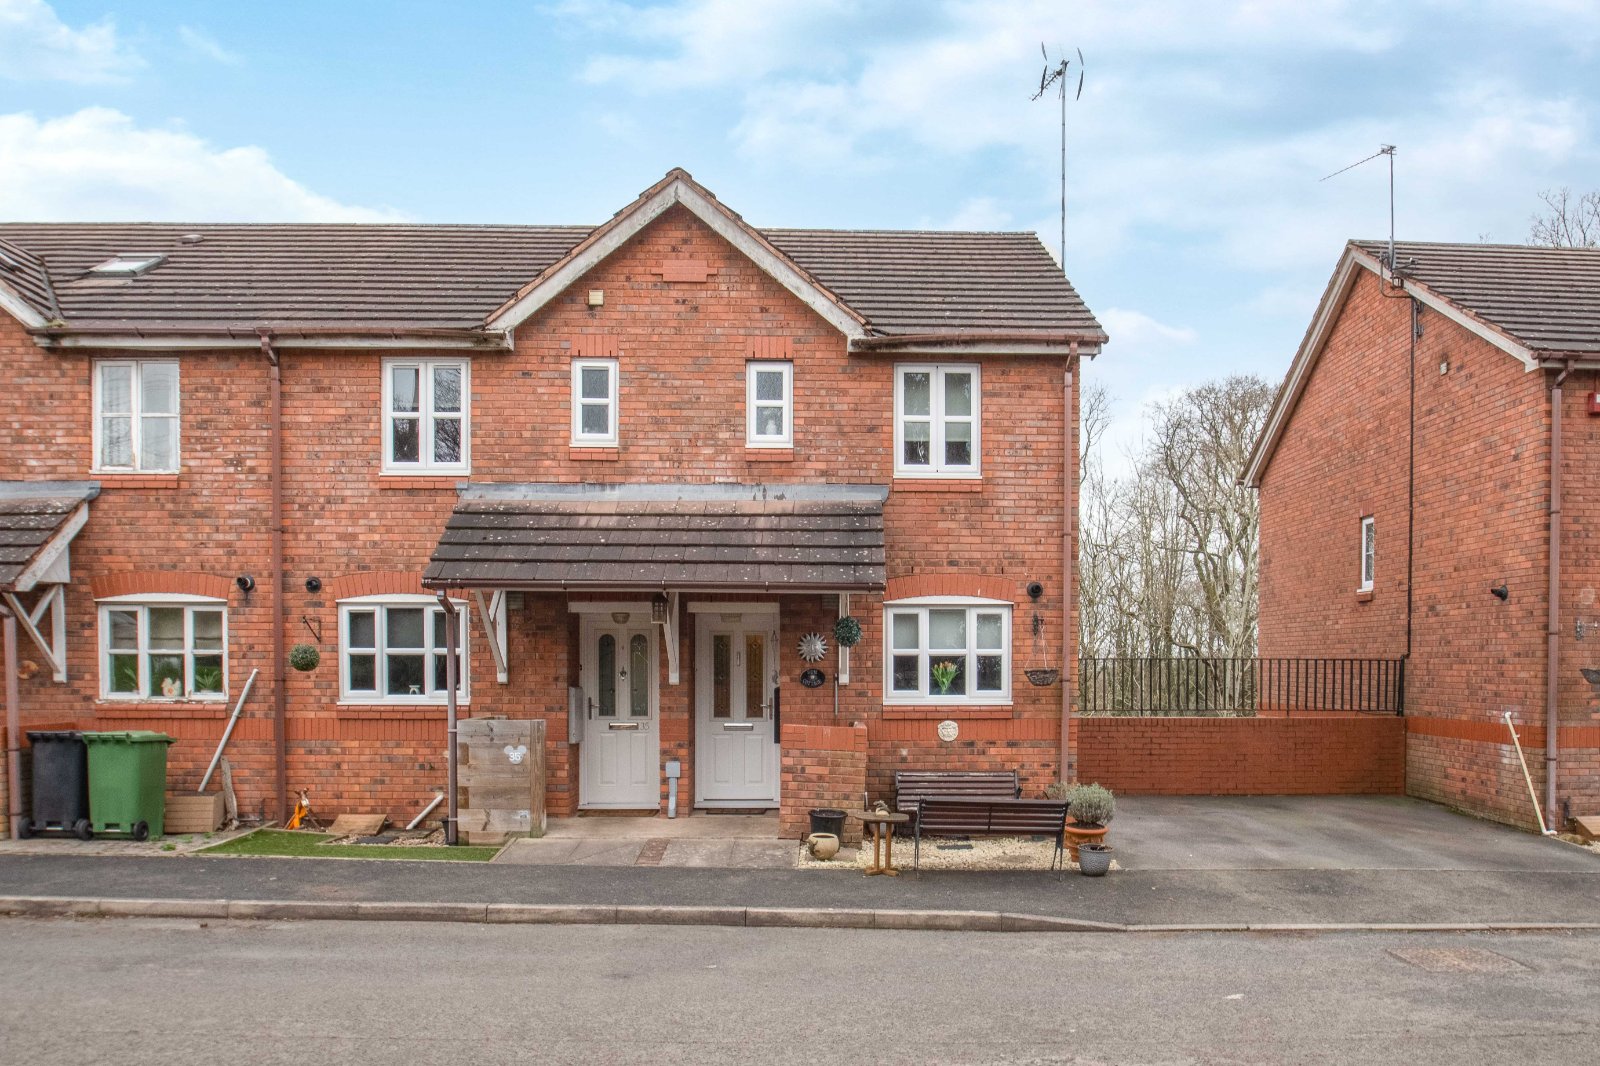 2 bed house for sale in Minworth Close, Redditch - Property Image 1